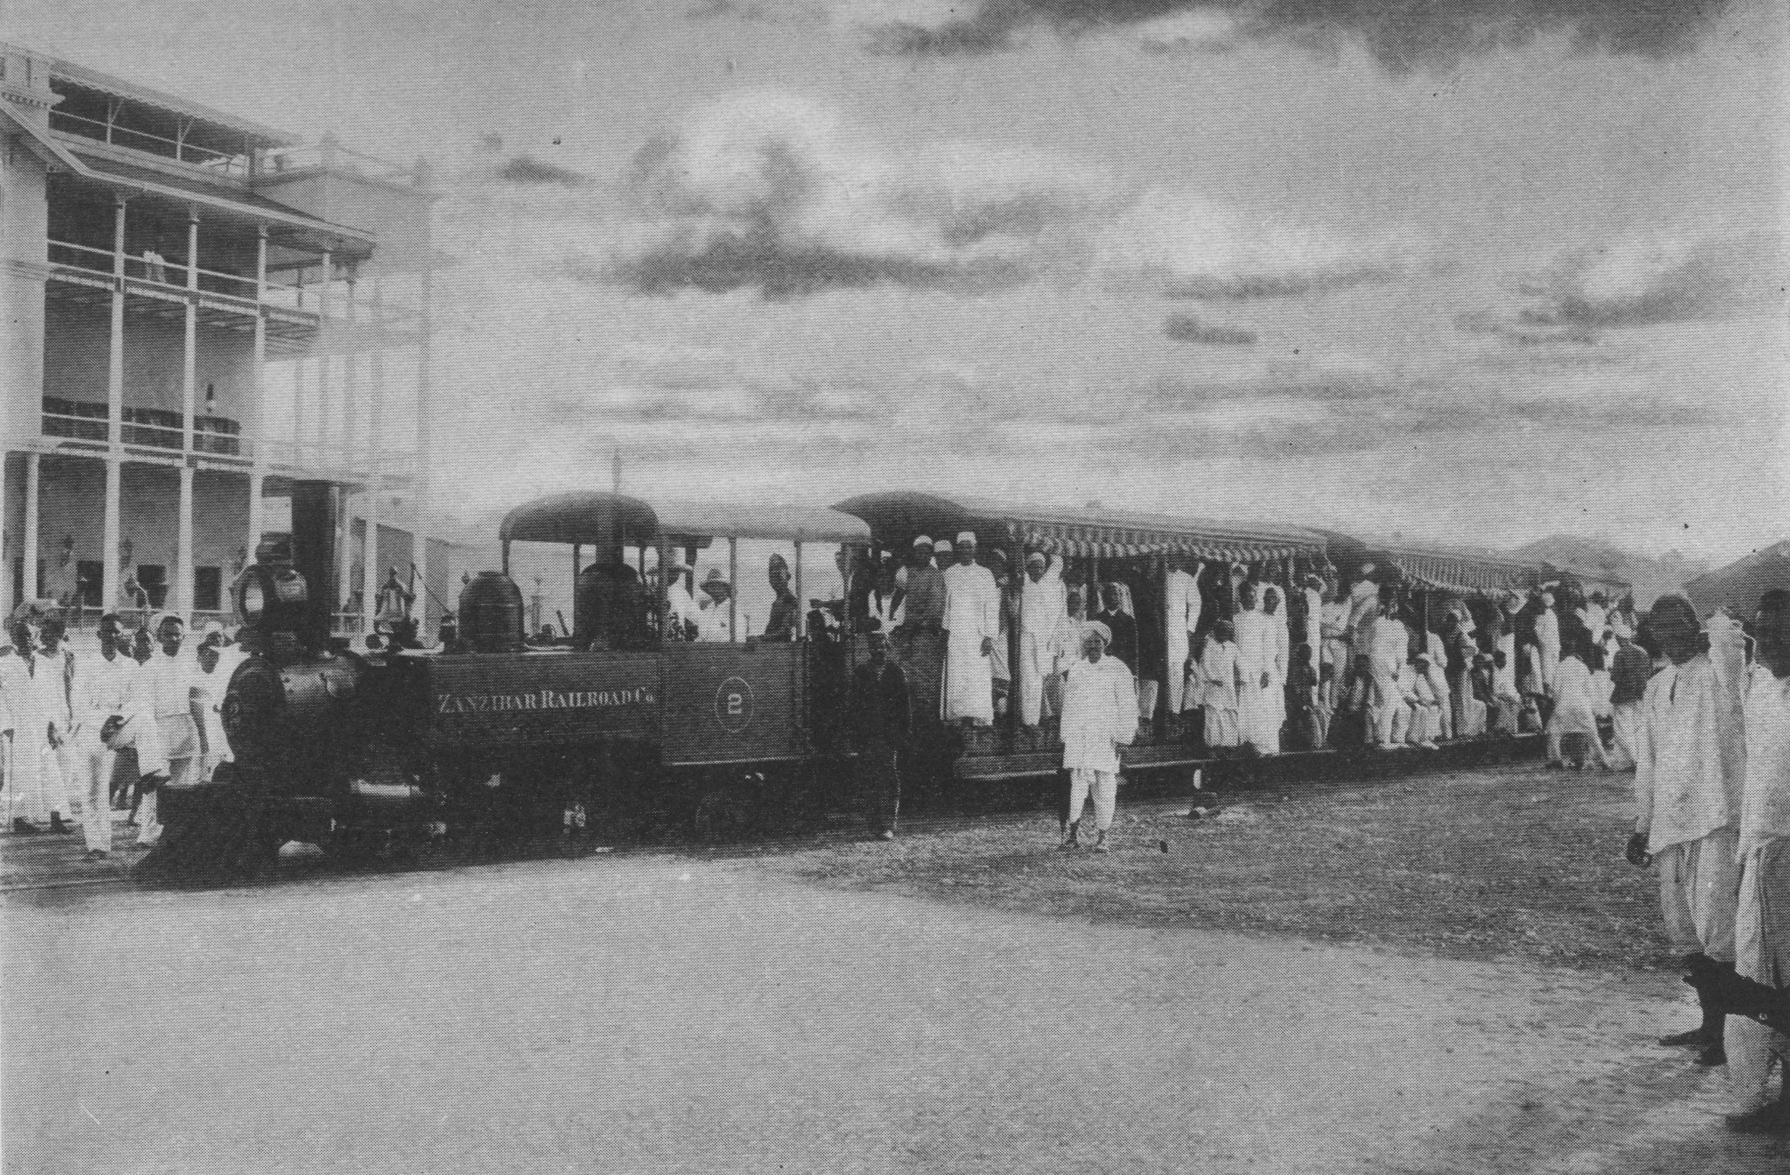 train with open-air cars and many people in light-colored clothing